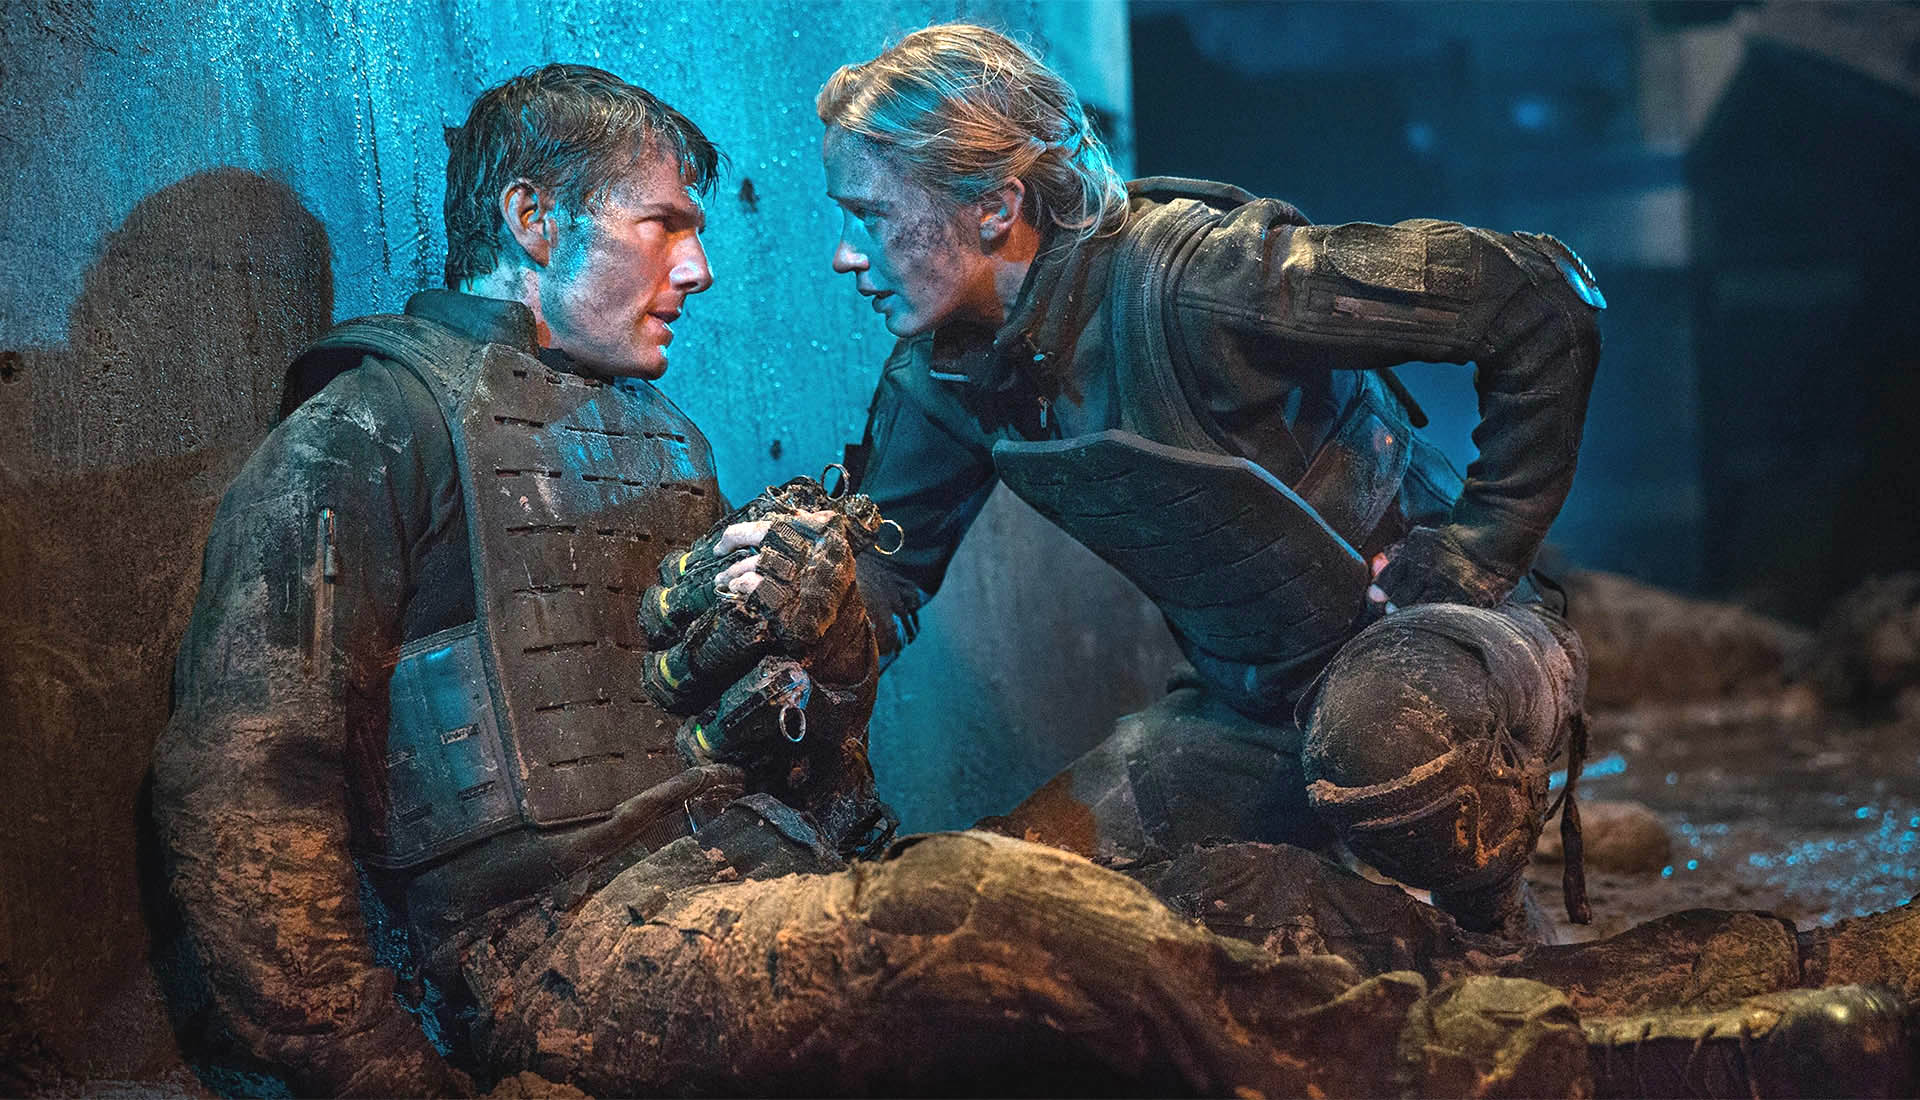 On the edge of tomorrow.  Tom Cruise gives it his all in this excellent sci-fi thriller